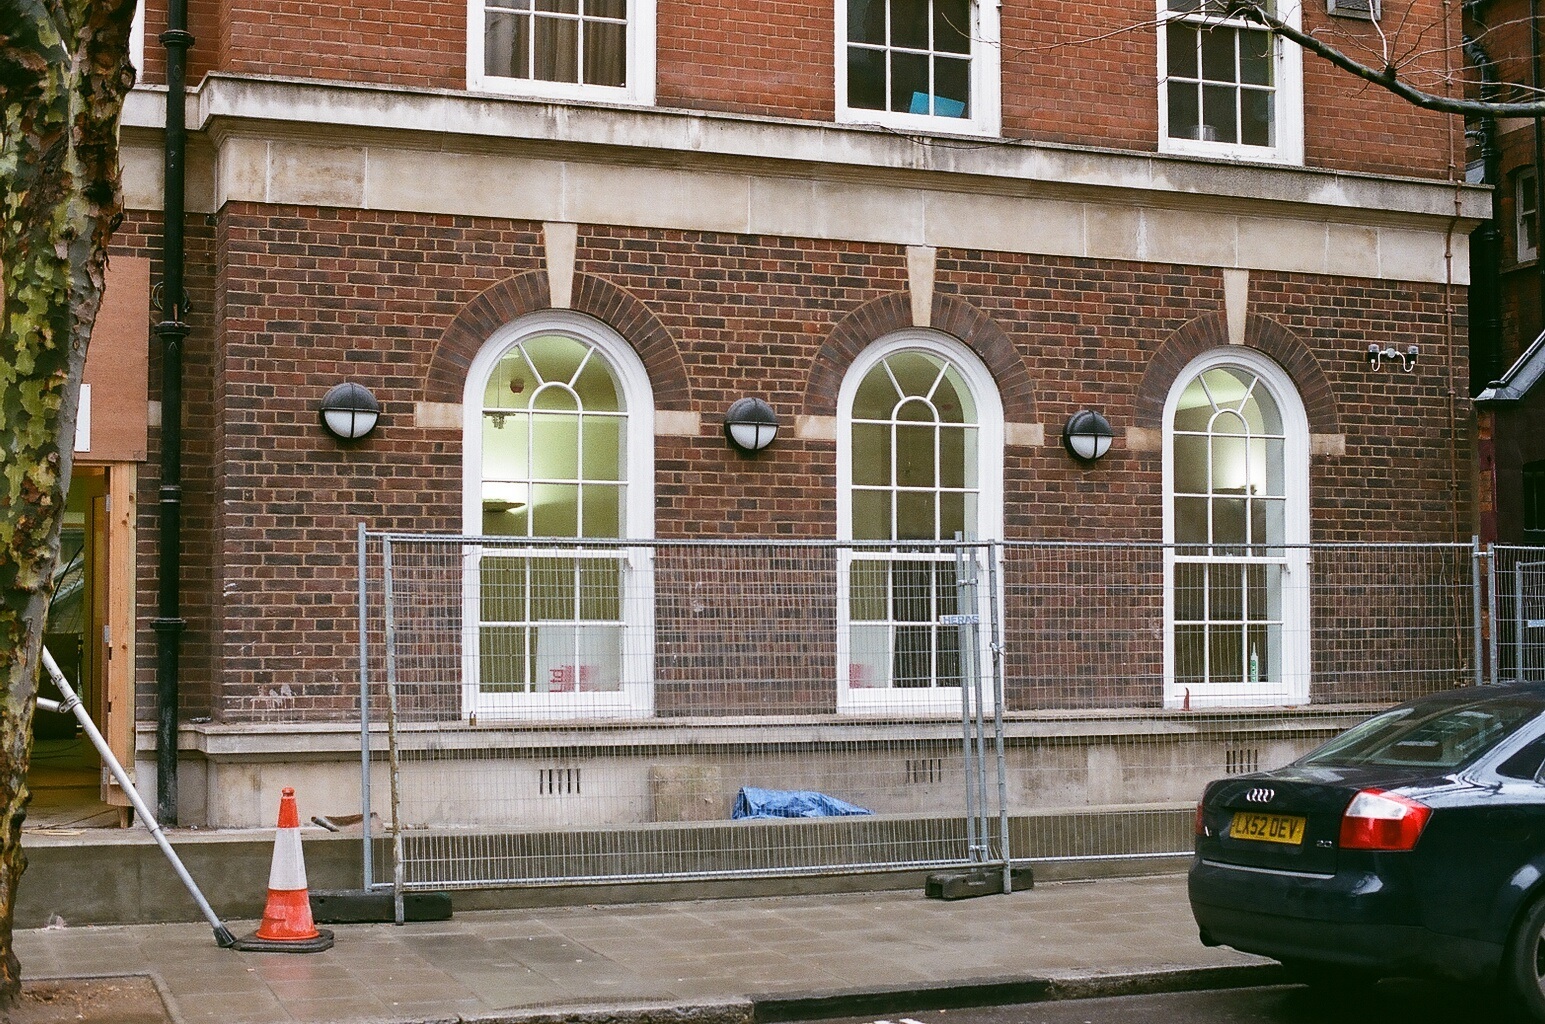 The new Fitzrovia Community Centre will be opening soon